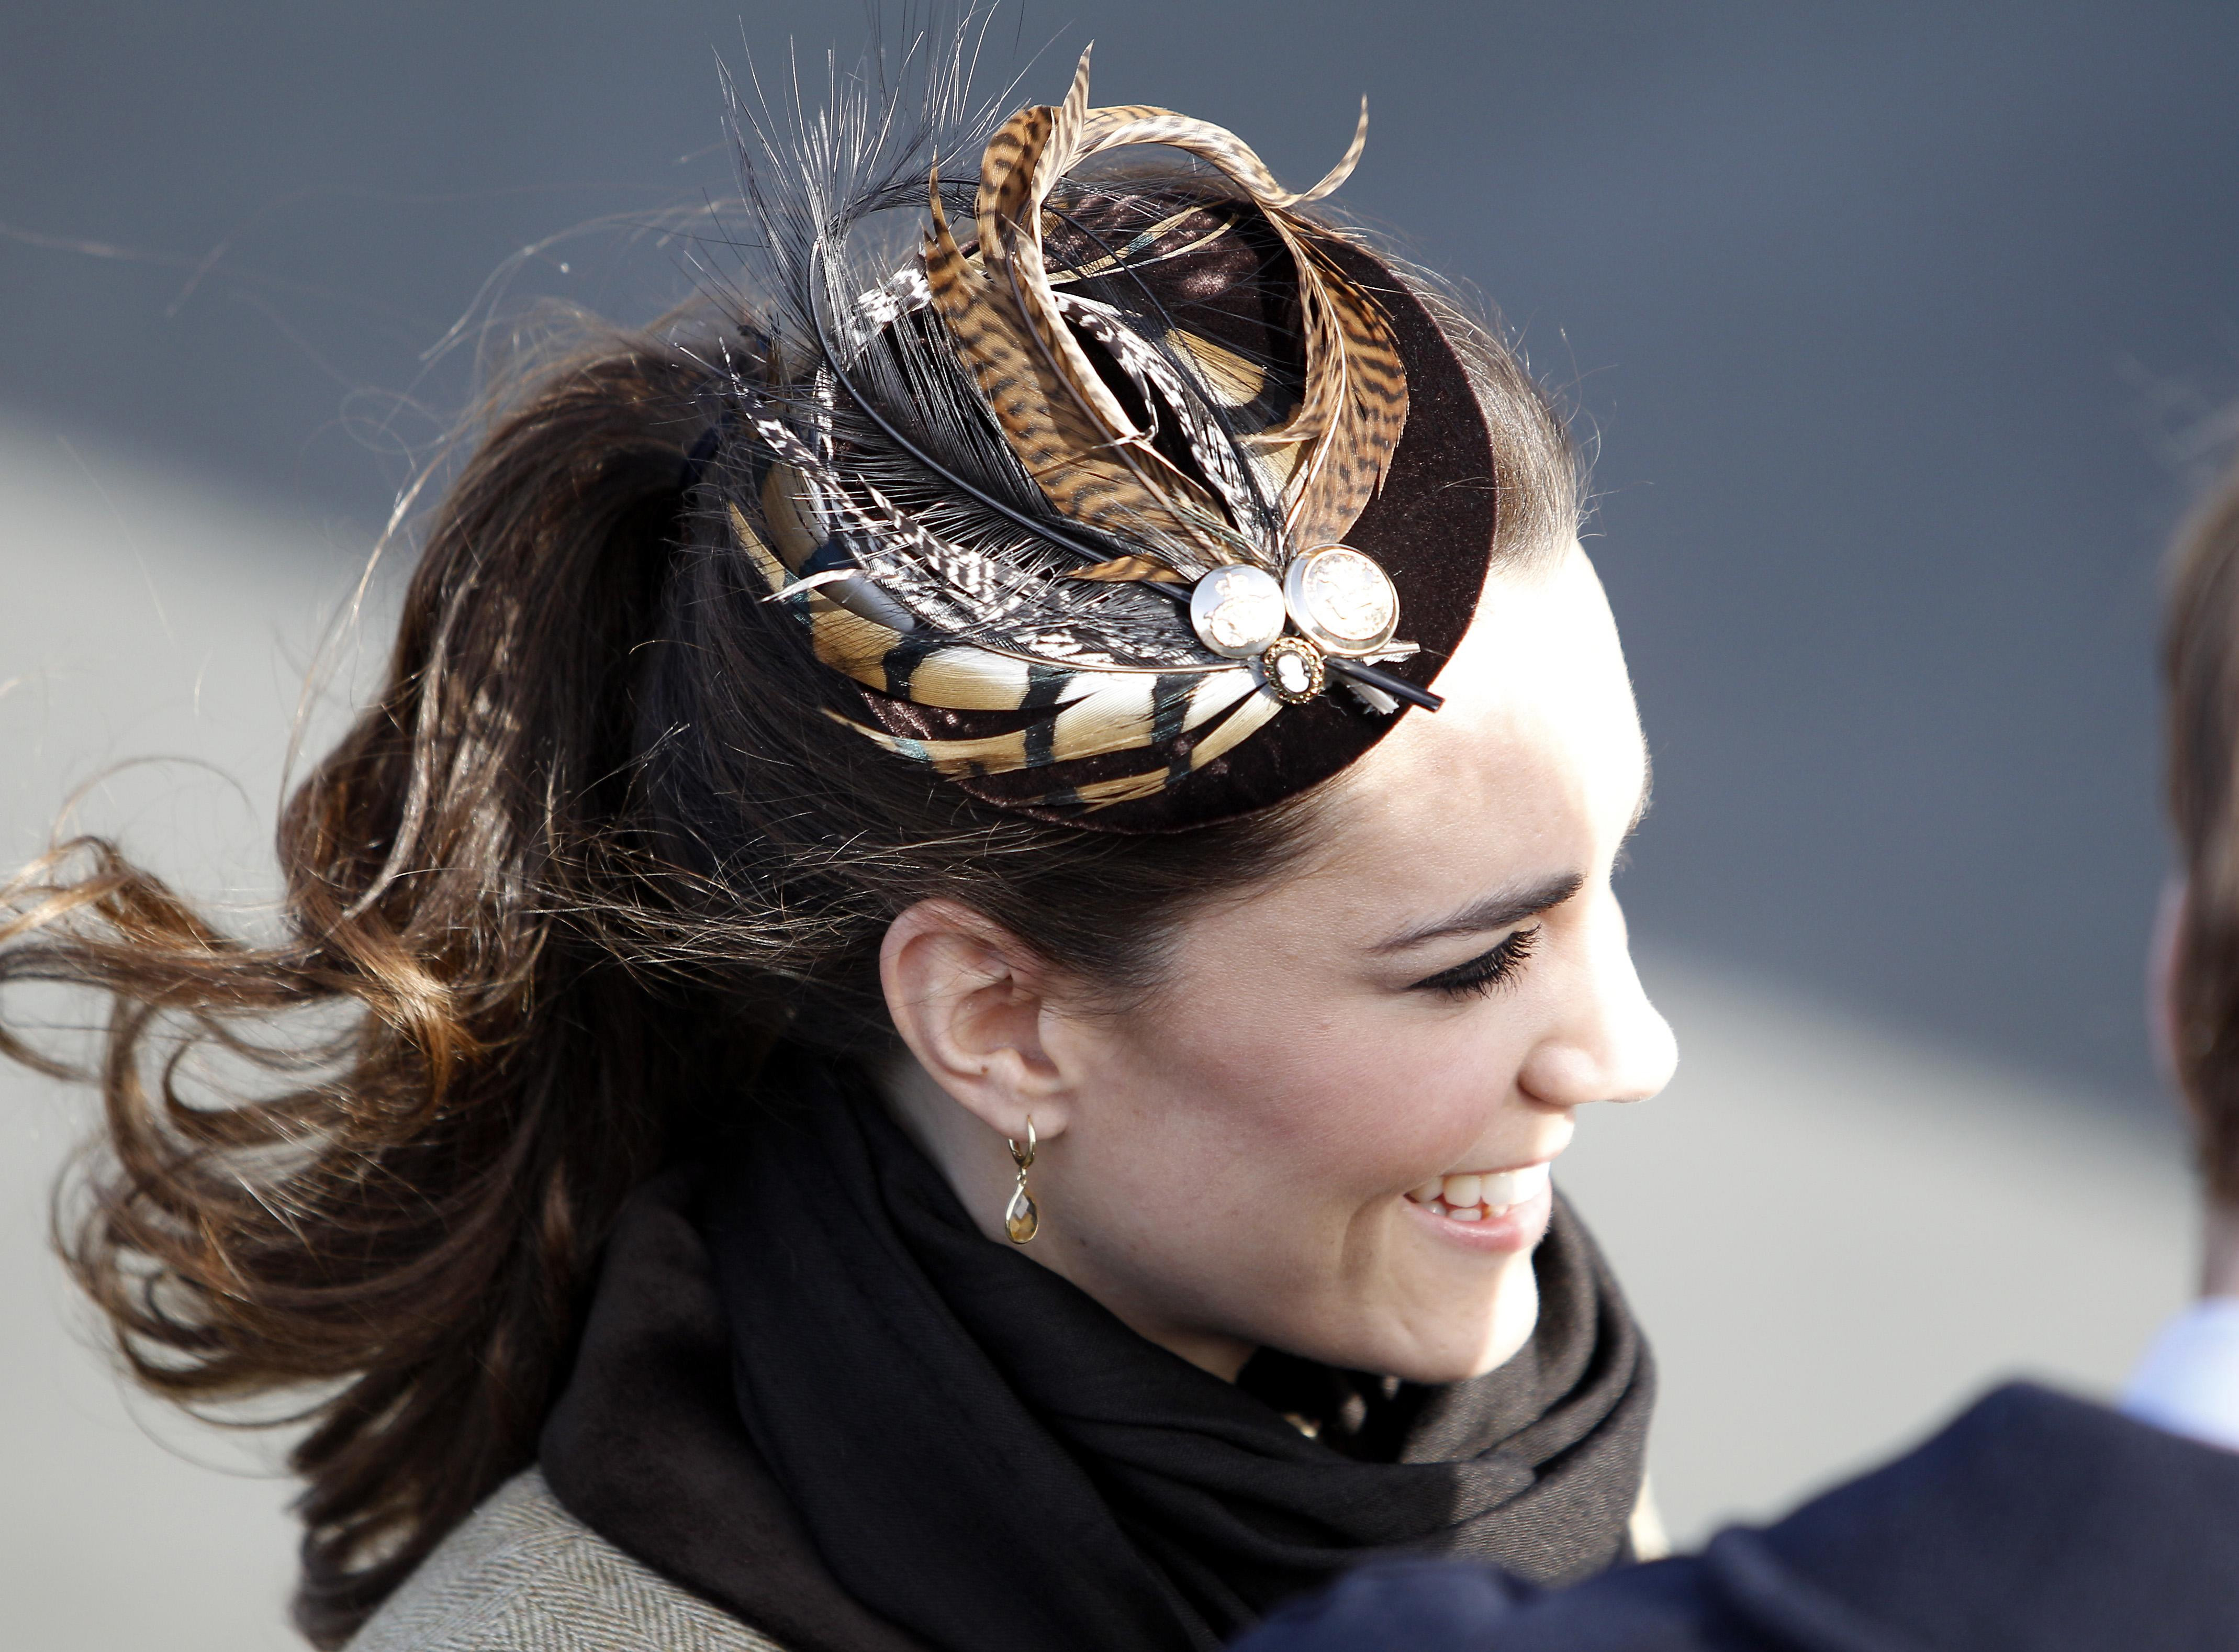 Kate Middleton wears a Vivien Sheriff hat at a service of dedication for a new RNLI lifeboat at Trearddur Bay Lifeboat Station in Anglesey, North Wales. (Peter Byrne - PA Images—PA Images via Getty Images)